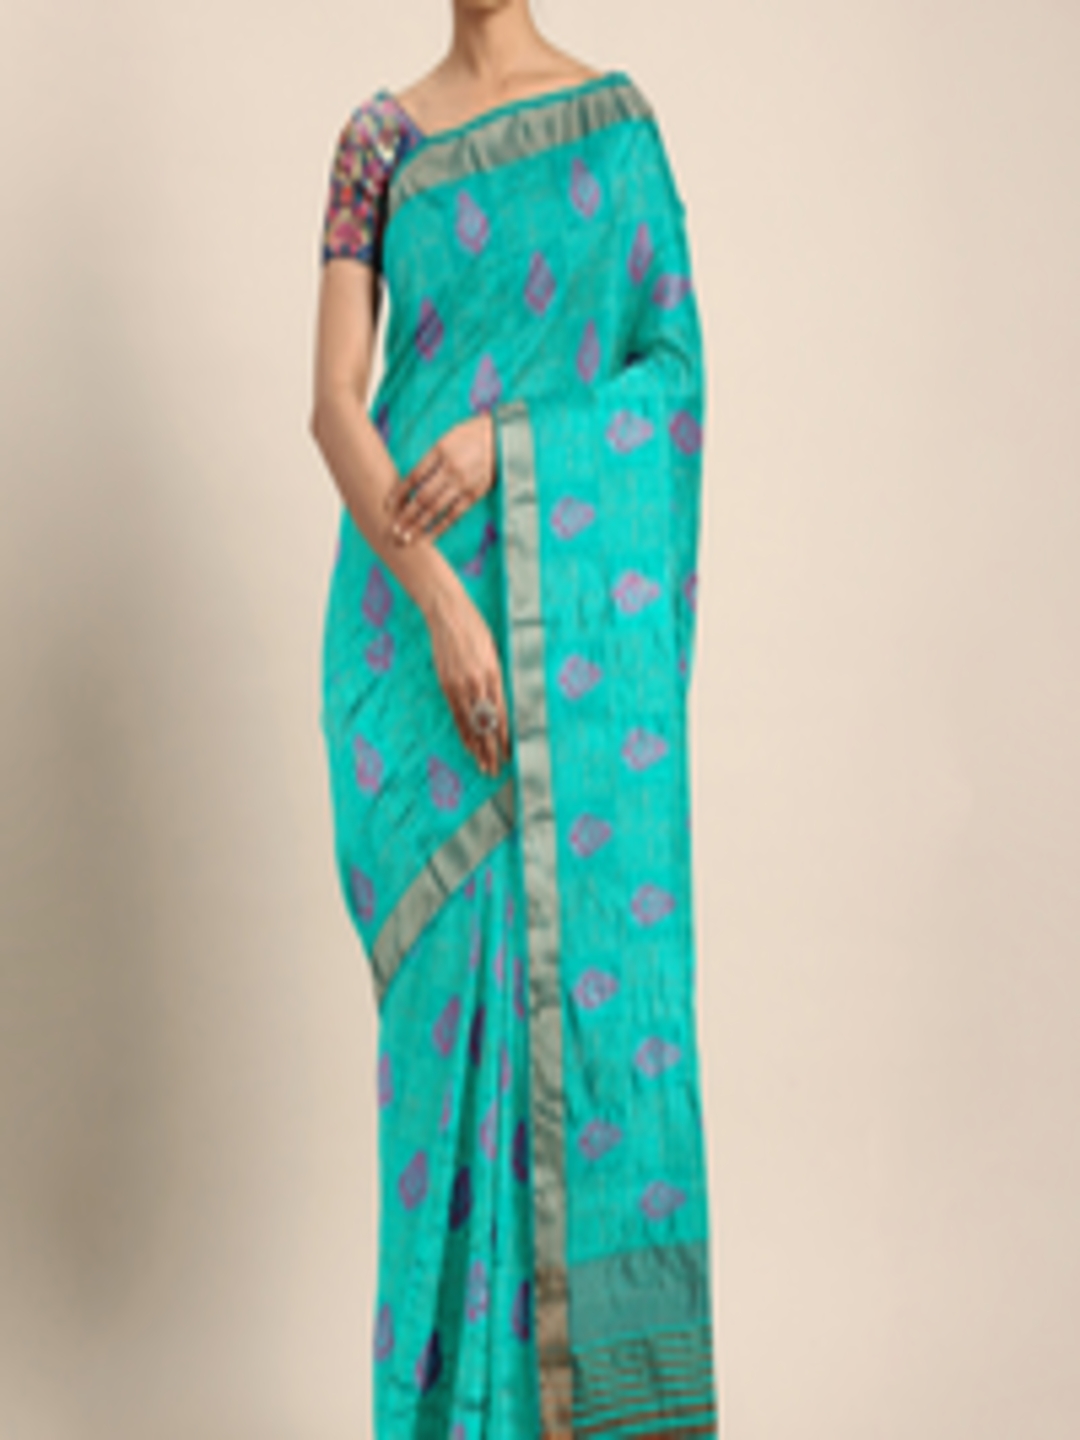 Buy The Chennai Silks Classicate Turquoise Blue Jute Silk Embroidered ...